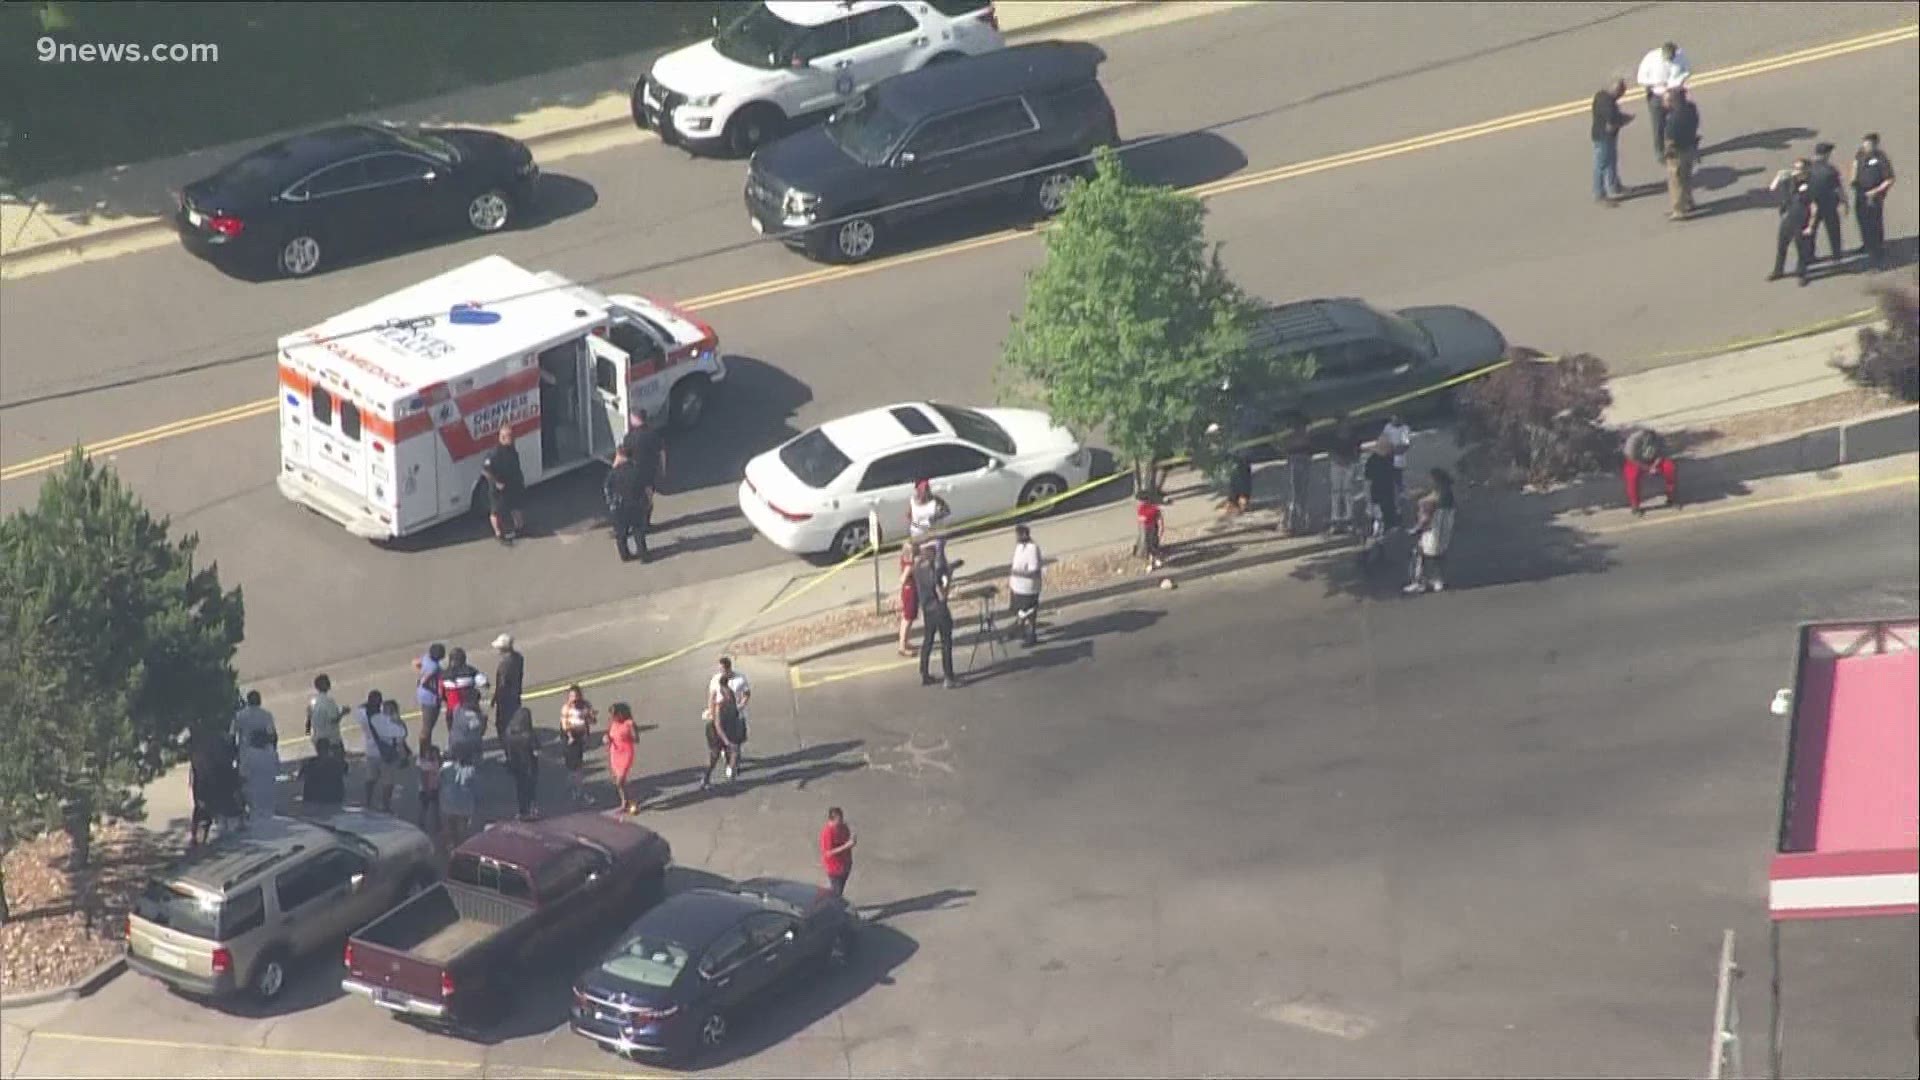 Denver Police said the child was found safe inside the car when the suspect left it near Monaco and Exposition.